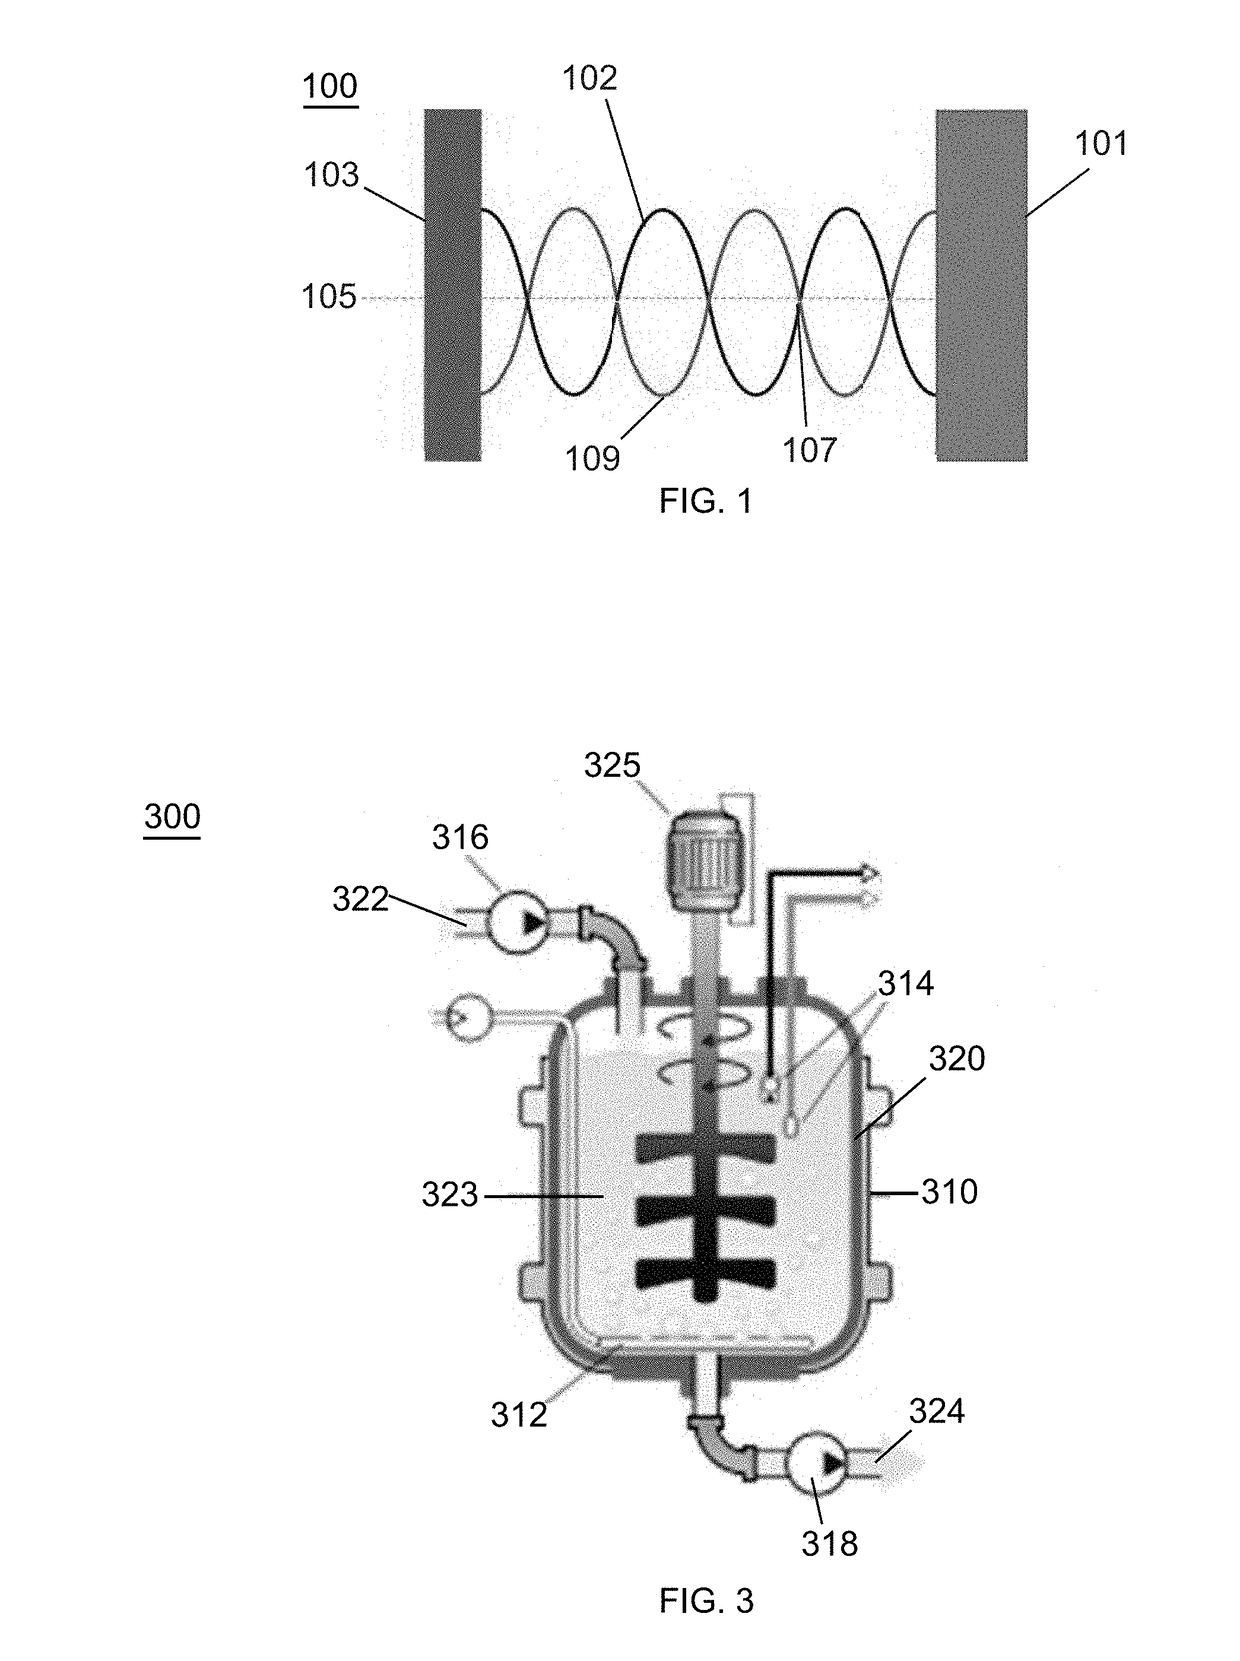 Acoustic perfusion devices